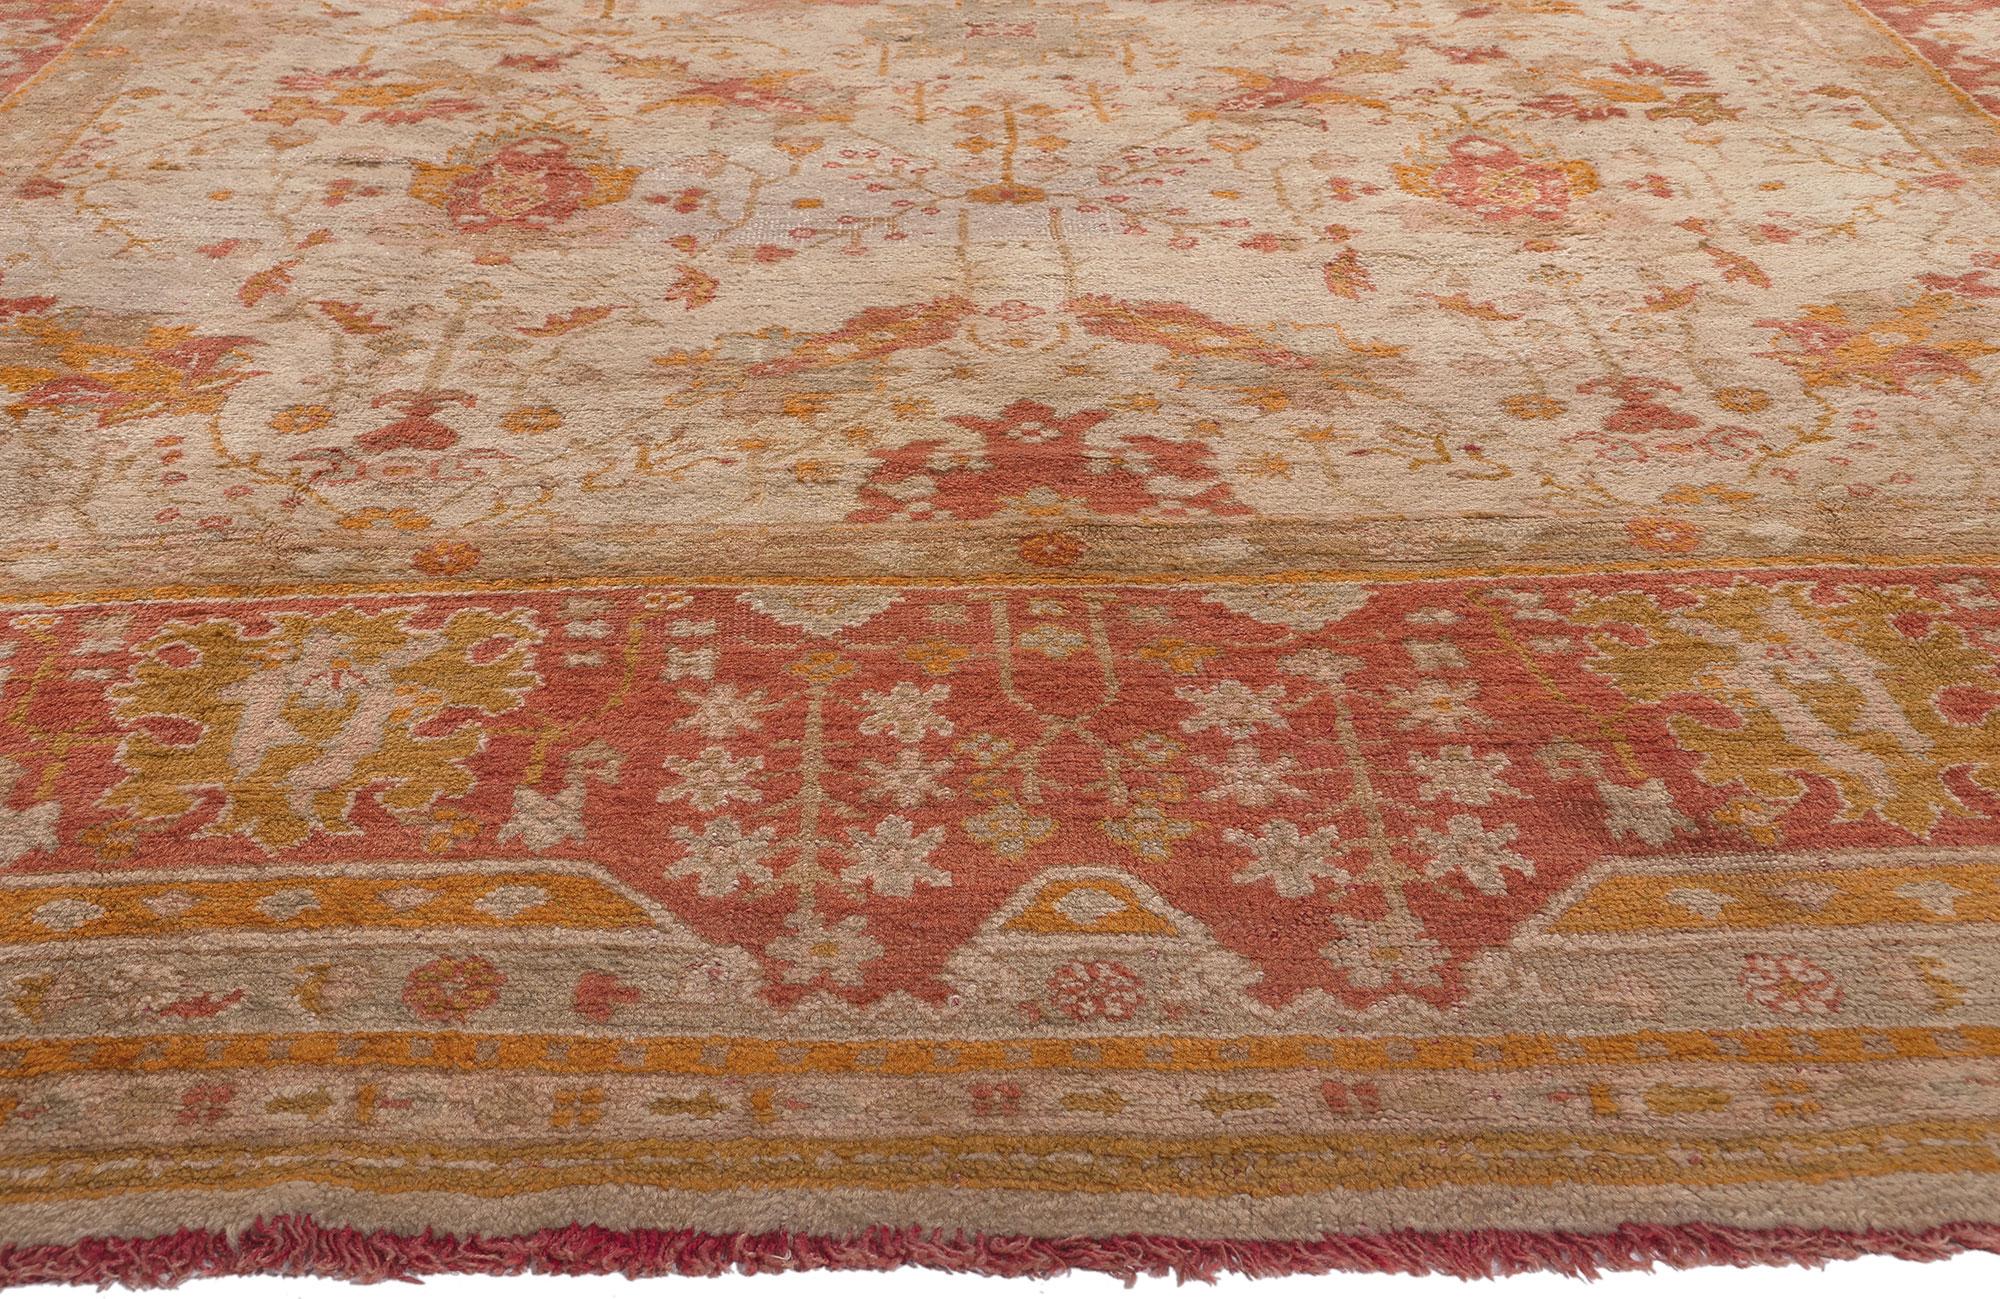 Antique Turkish Oushak Rug, Relaxed Familiarity Meets Understated Elegance In Good Condition For Sale In Dallas, TX